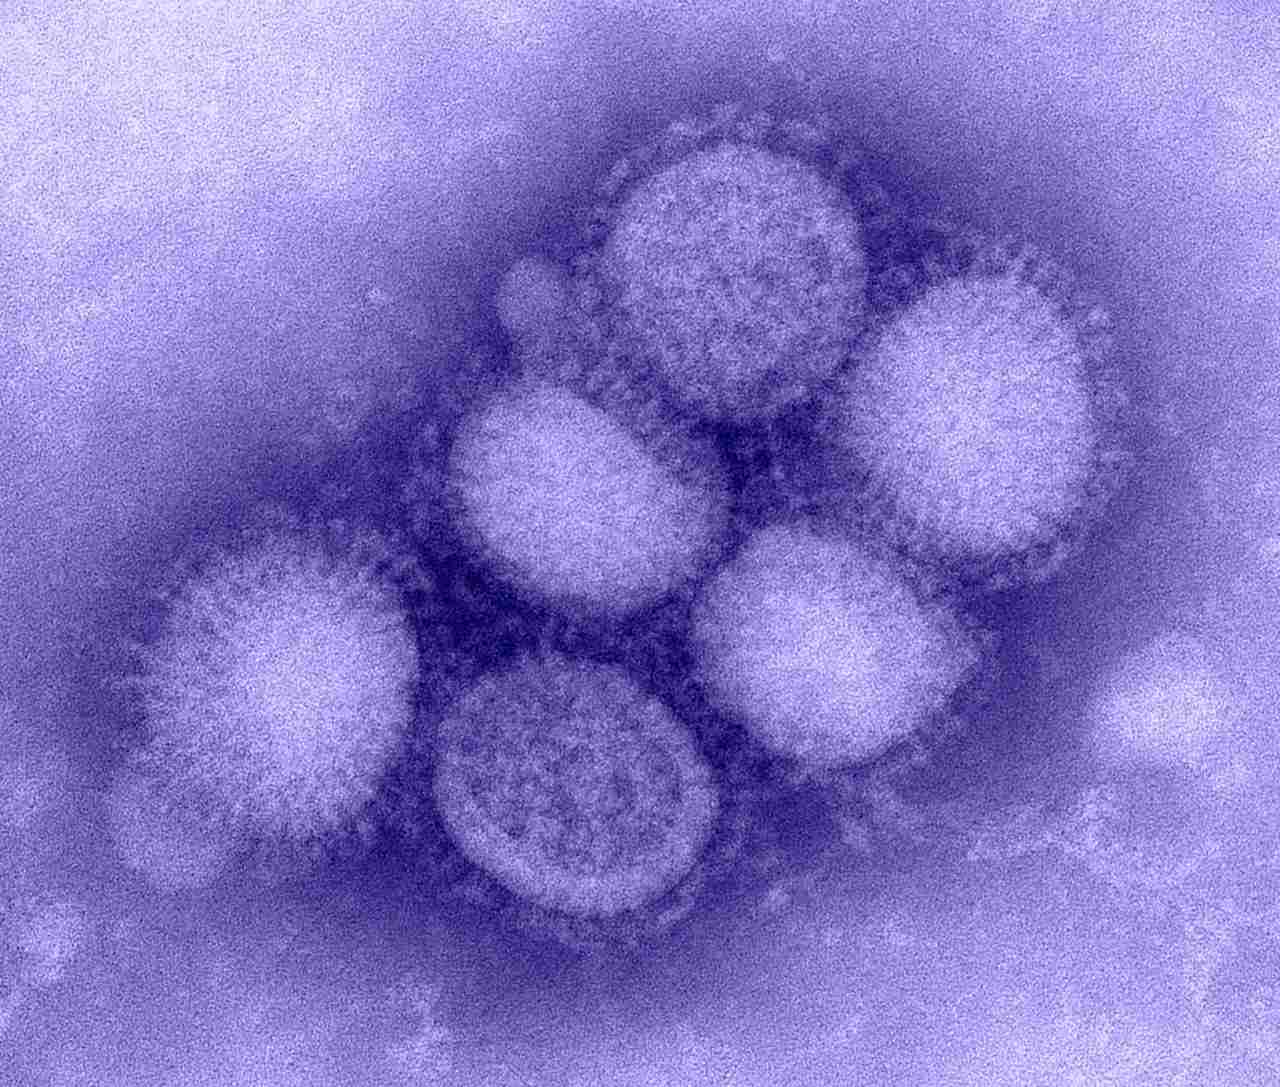 An electron microscope image of the H1N1 influenza virus, taken at the CDC's Influenza Laboratory. Each virus is a mere 80–120 nanometres in diameter. Image: CDC/Wikimedia Commons